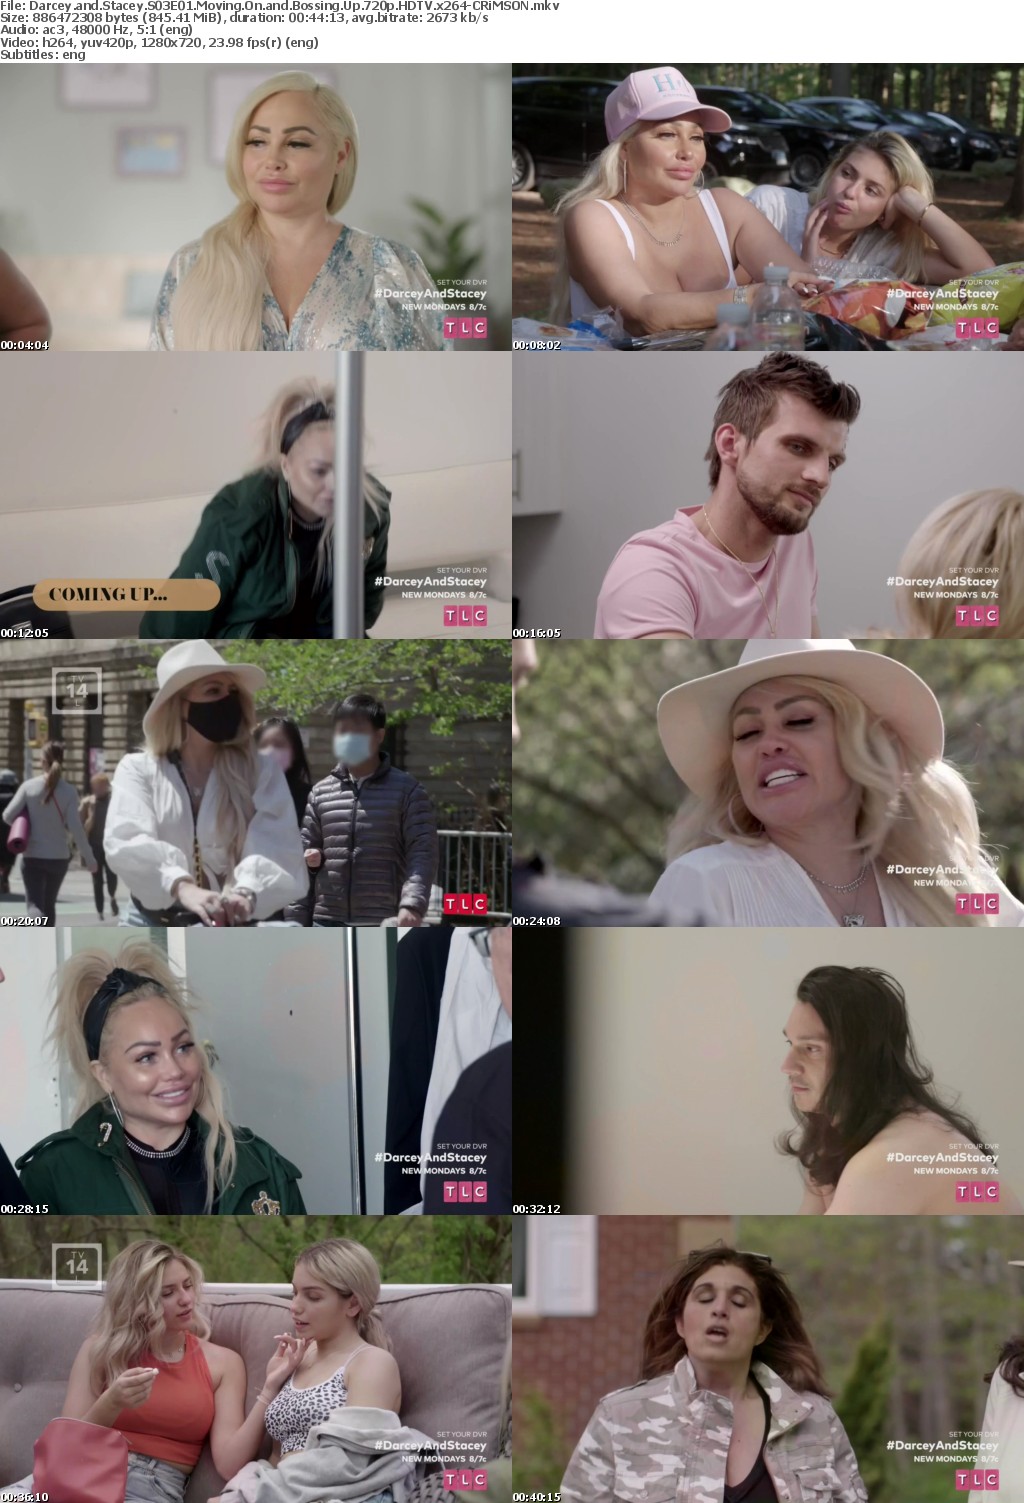 Darcey and Stacey S03E01 Moving On and Bossing Up 720p HDTV x264-CRiMSON